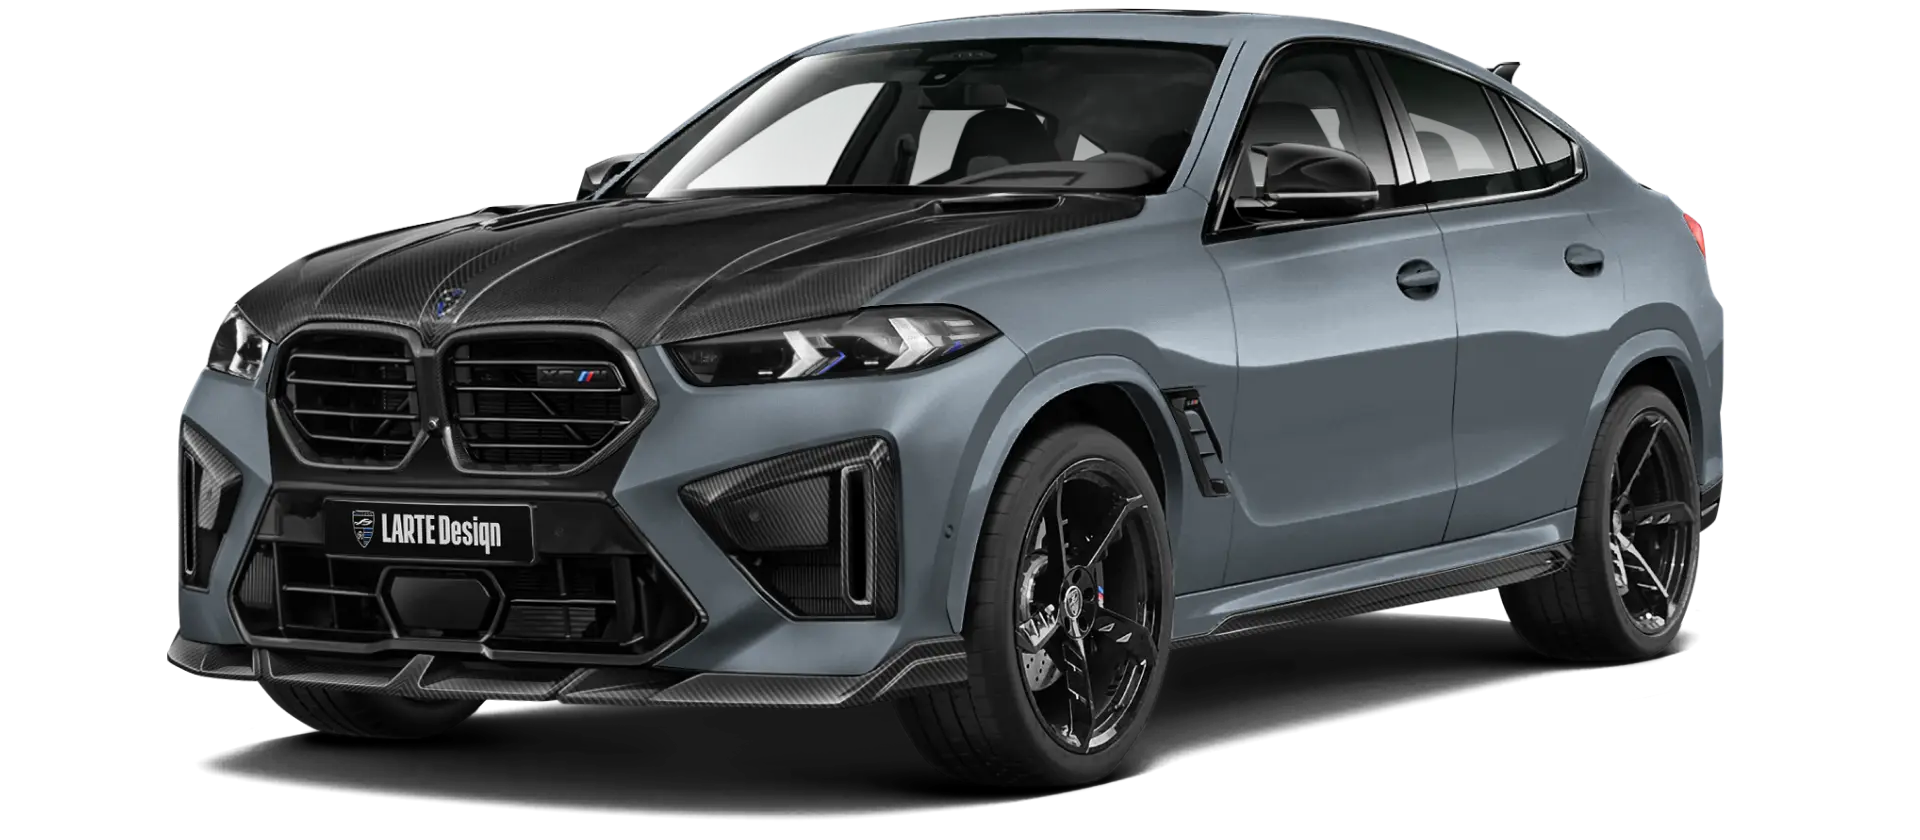 BMW X6M F96 LCI 2023 with carbon body kit: front view shown in Frosty clean gray